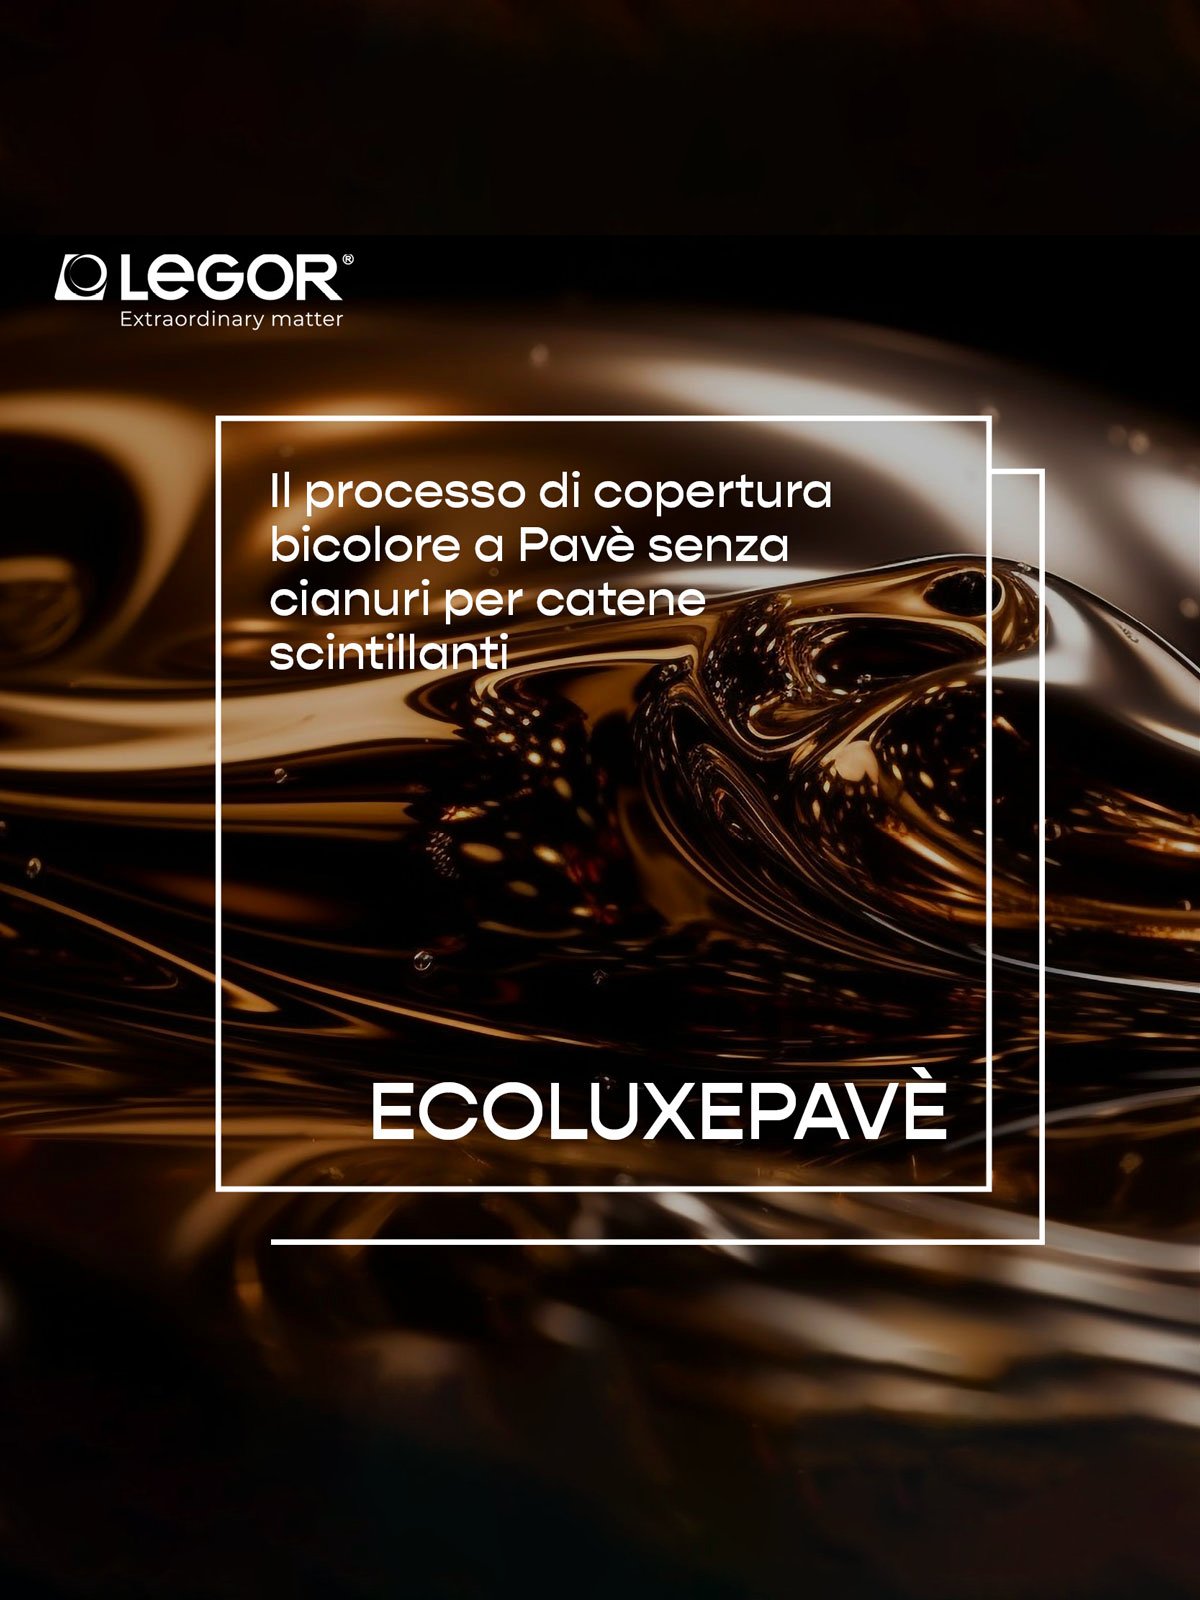 Ecoluxepavé: Legor's new roofing process is cyanide-free